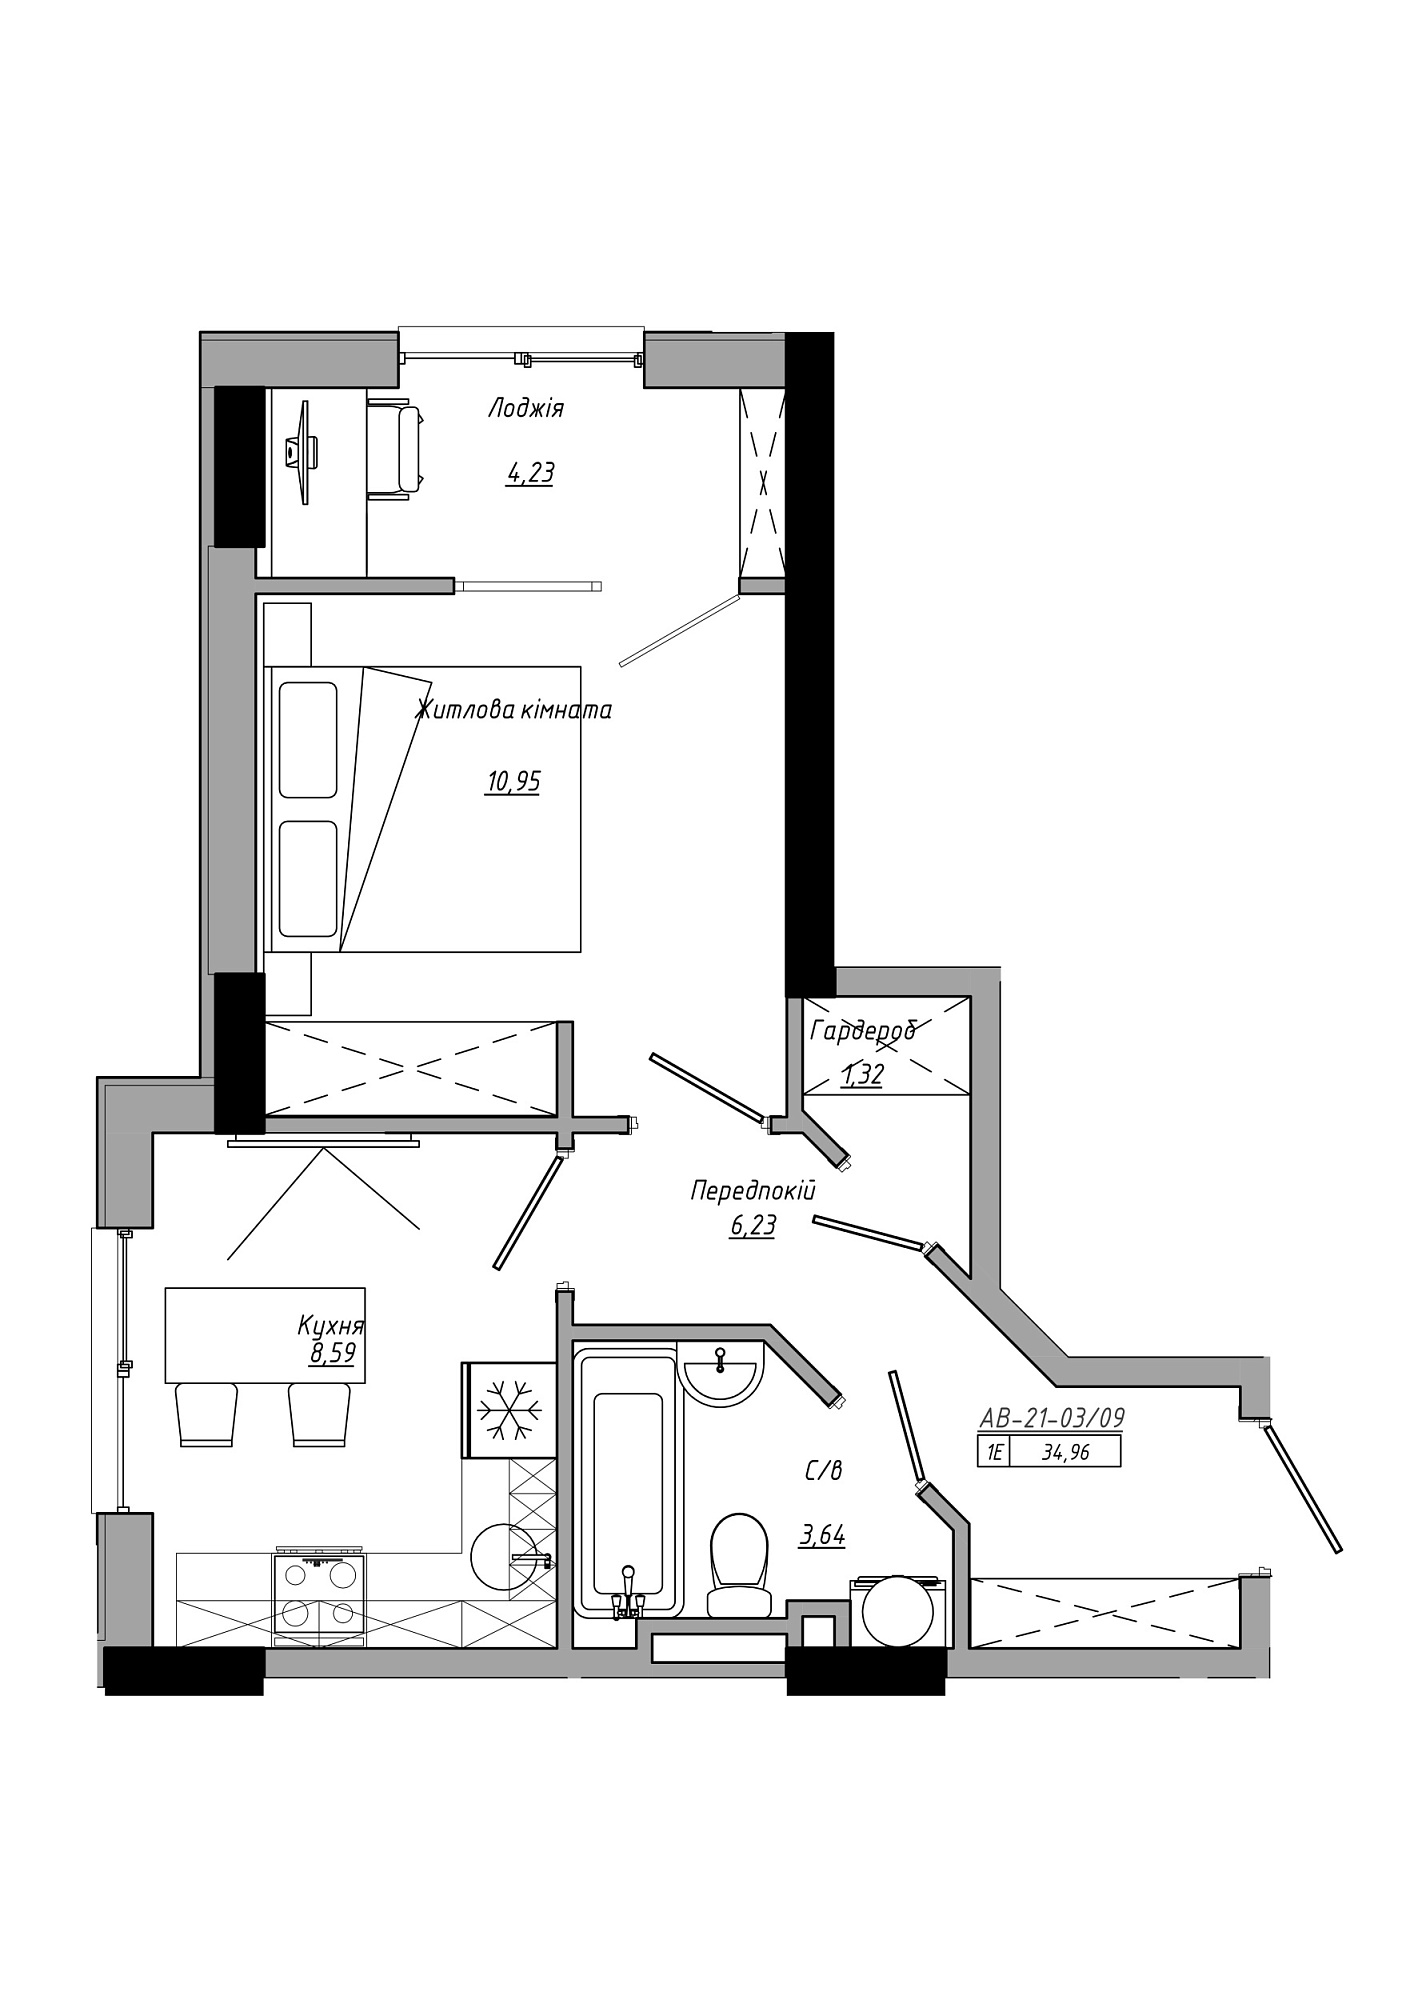 Planning 1-rm flats area 34.96m2, AB-21-03/00009.